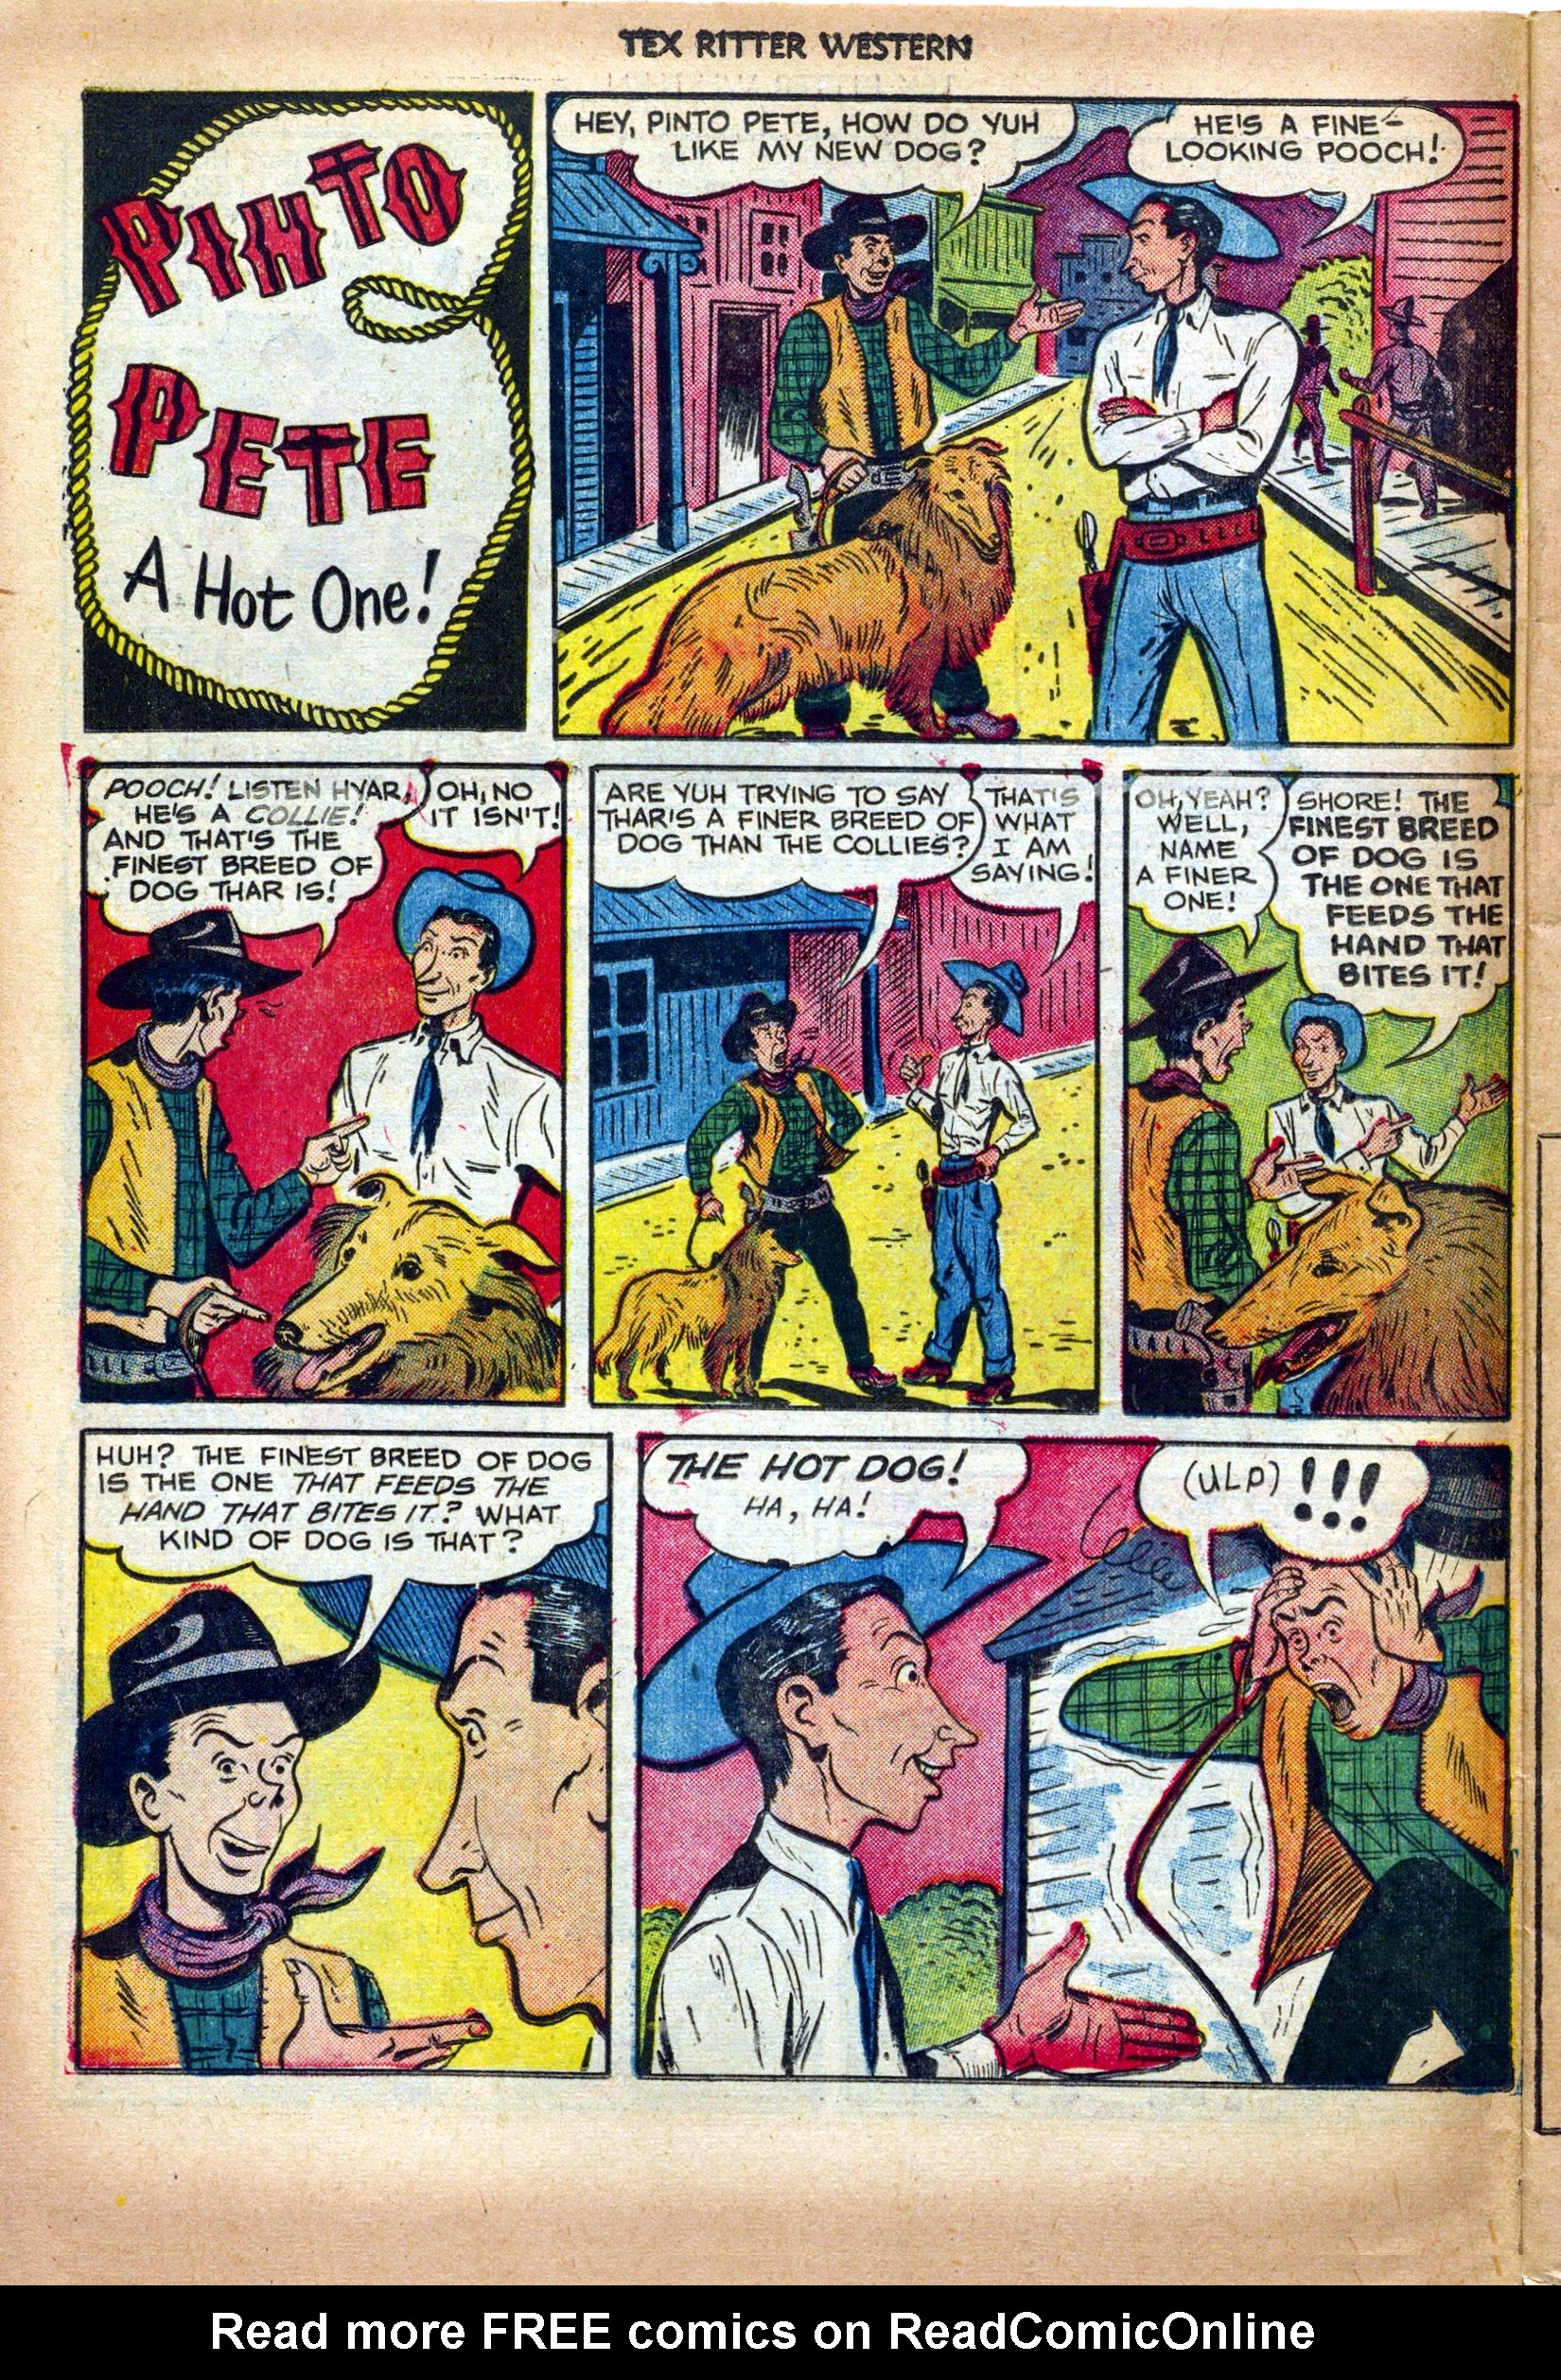 Read online Tex Ritter Western comic -  Issue #13 - 10